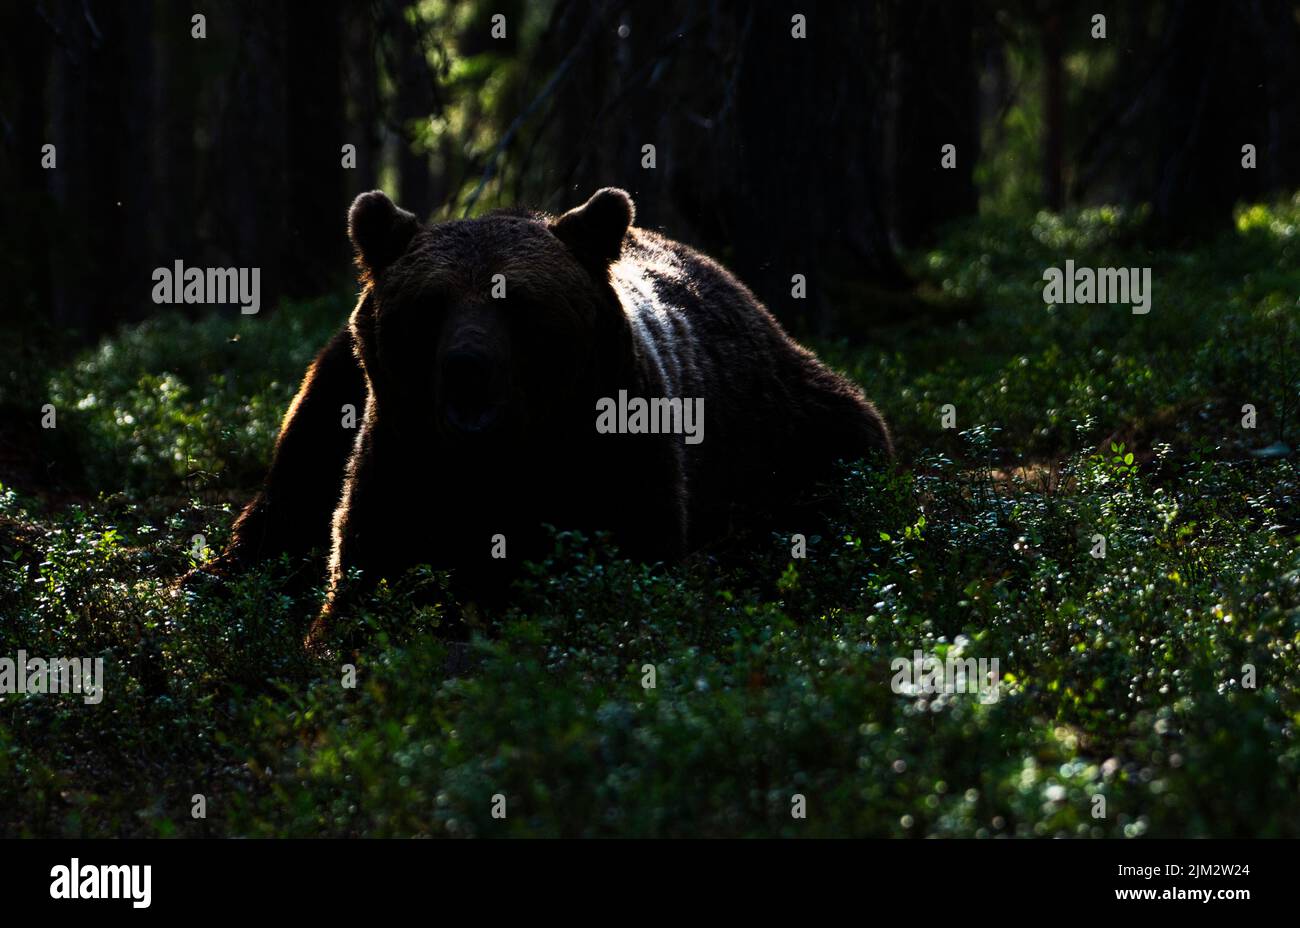 Rim-lit silhouette of a brown bear (Ursus arctos) in the taiga forest of Finland Stock Photo